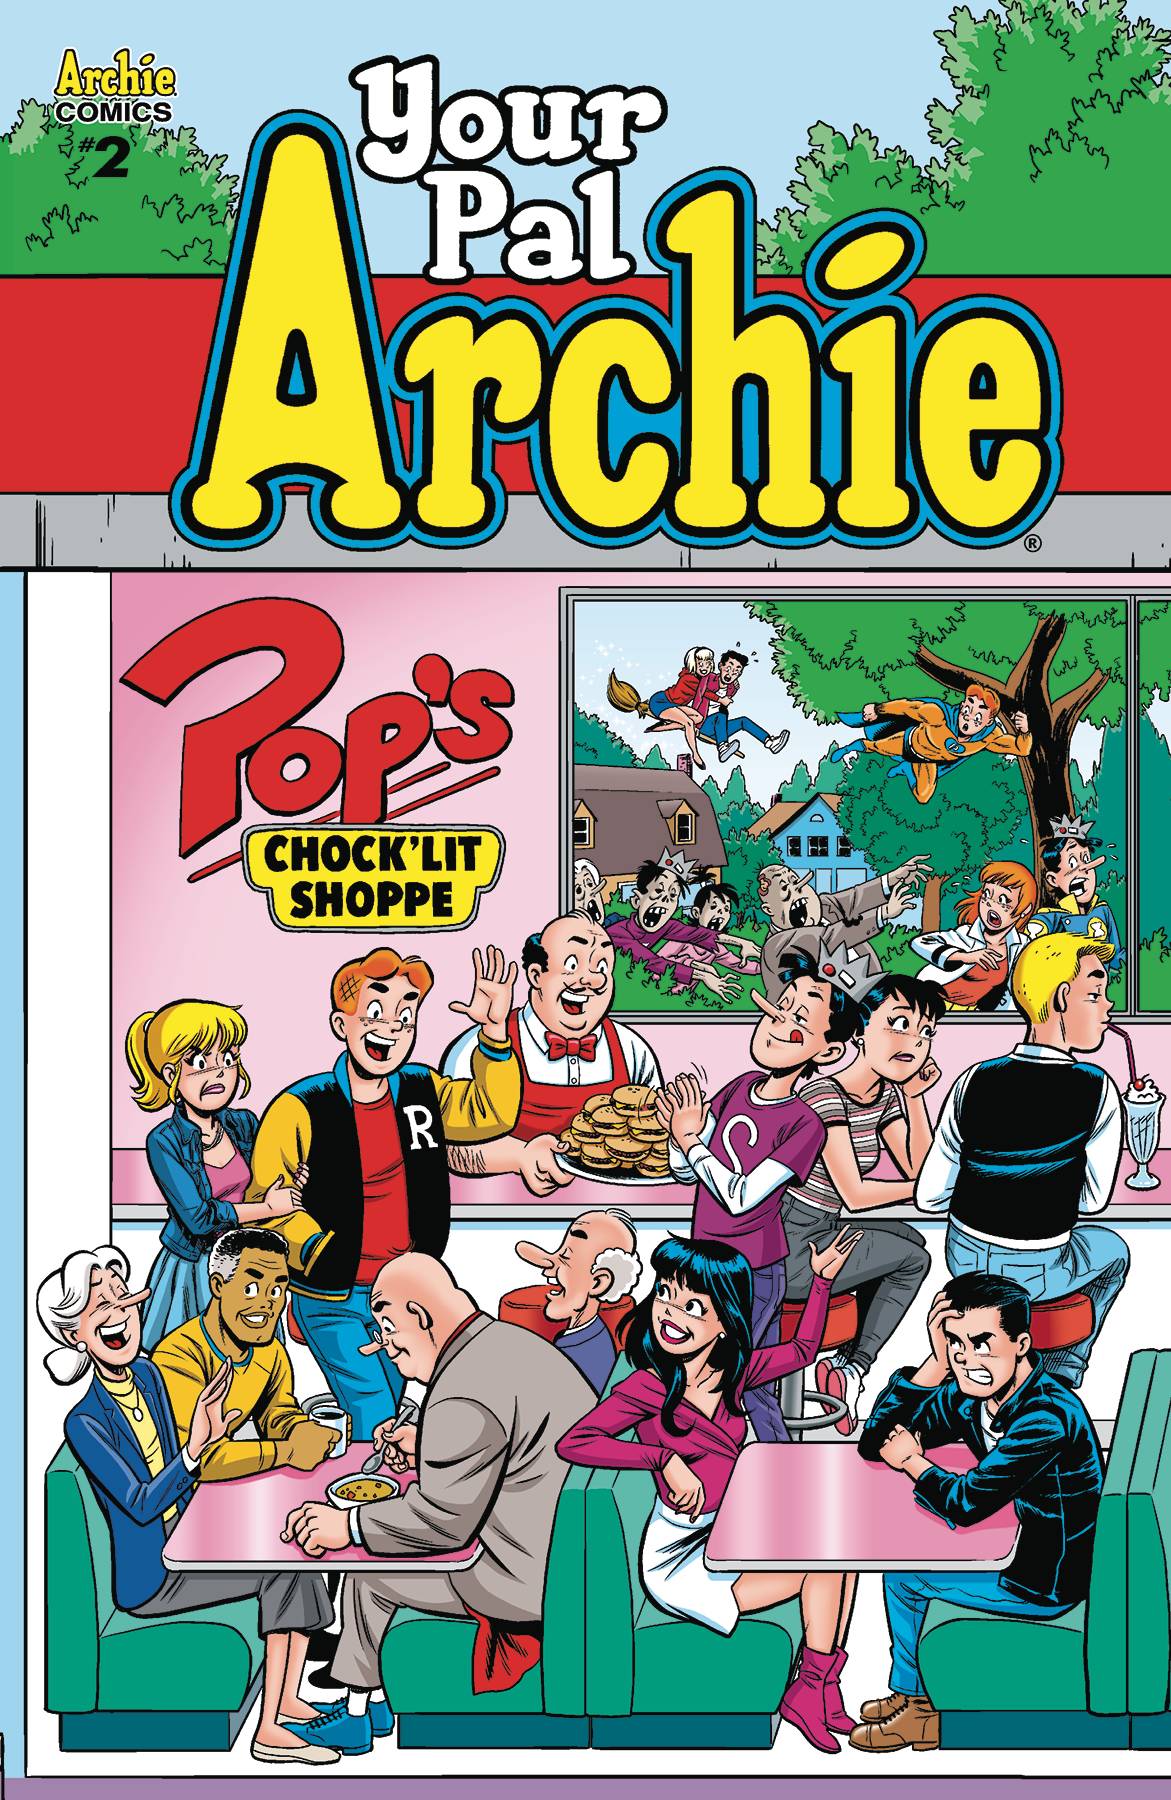 ALL-NEW CLASSIC ARCHIE: YOUR PAL, ARCHIE#2